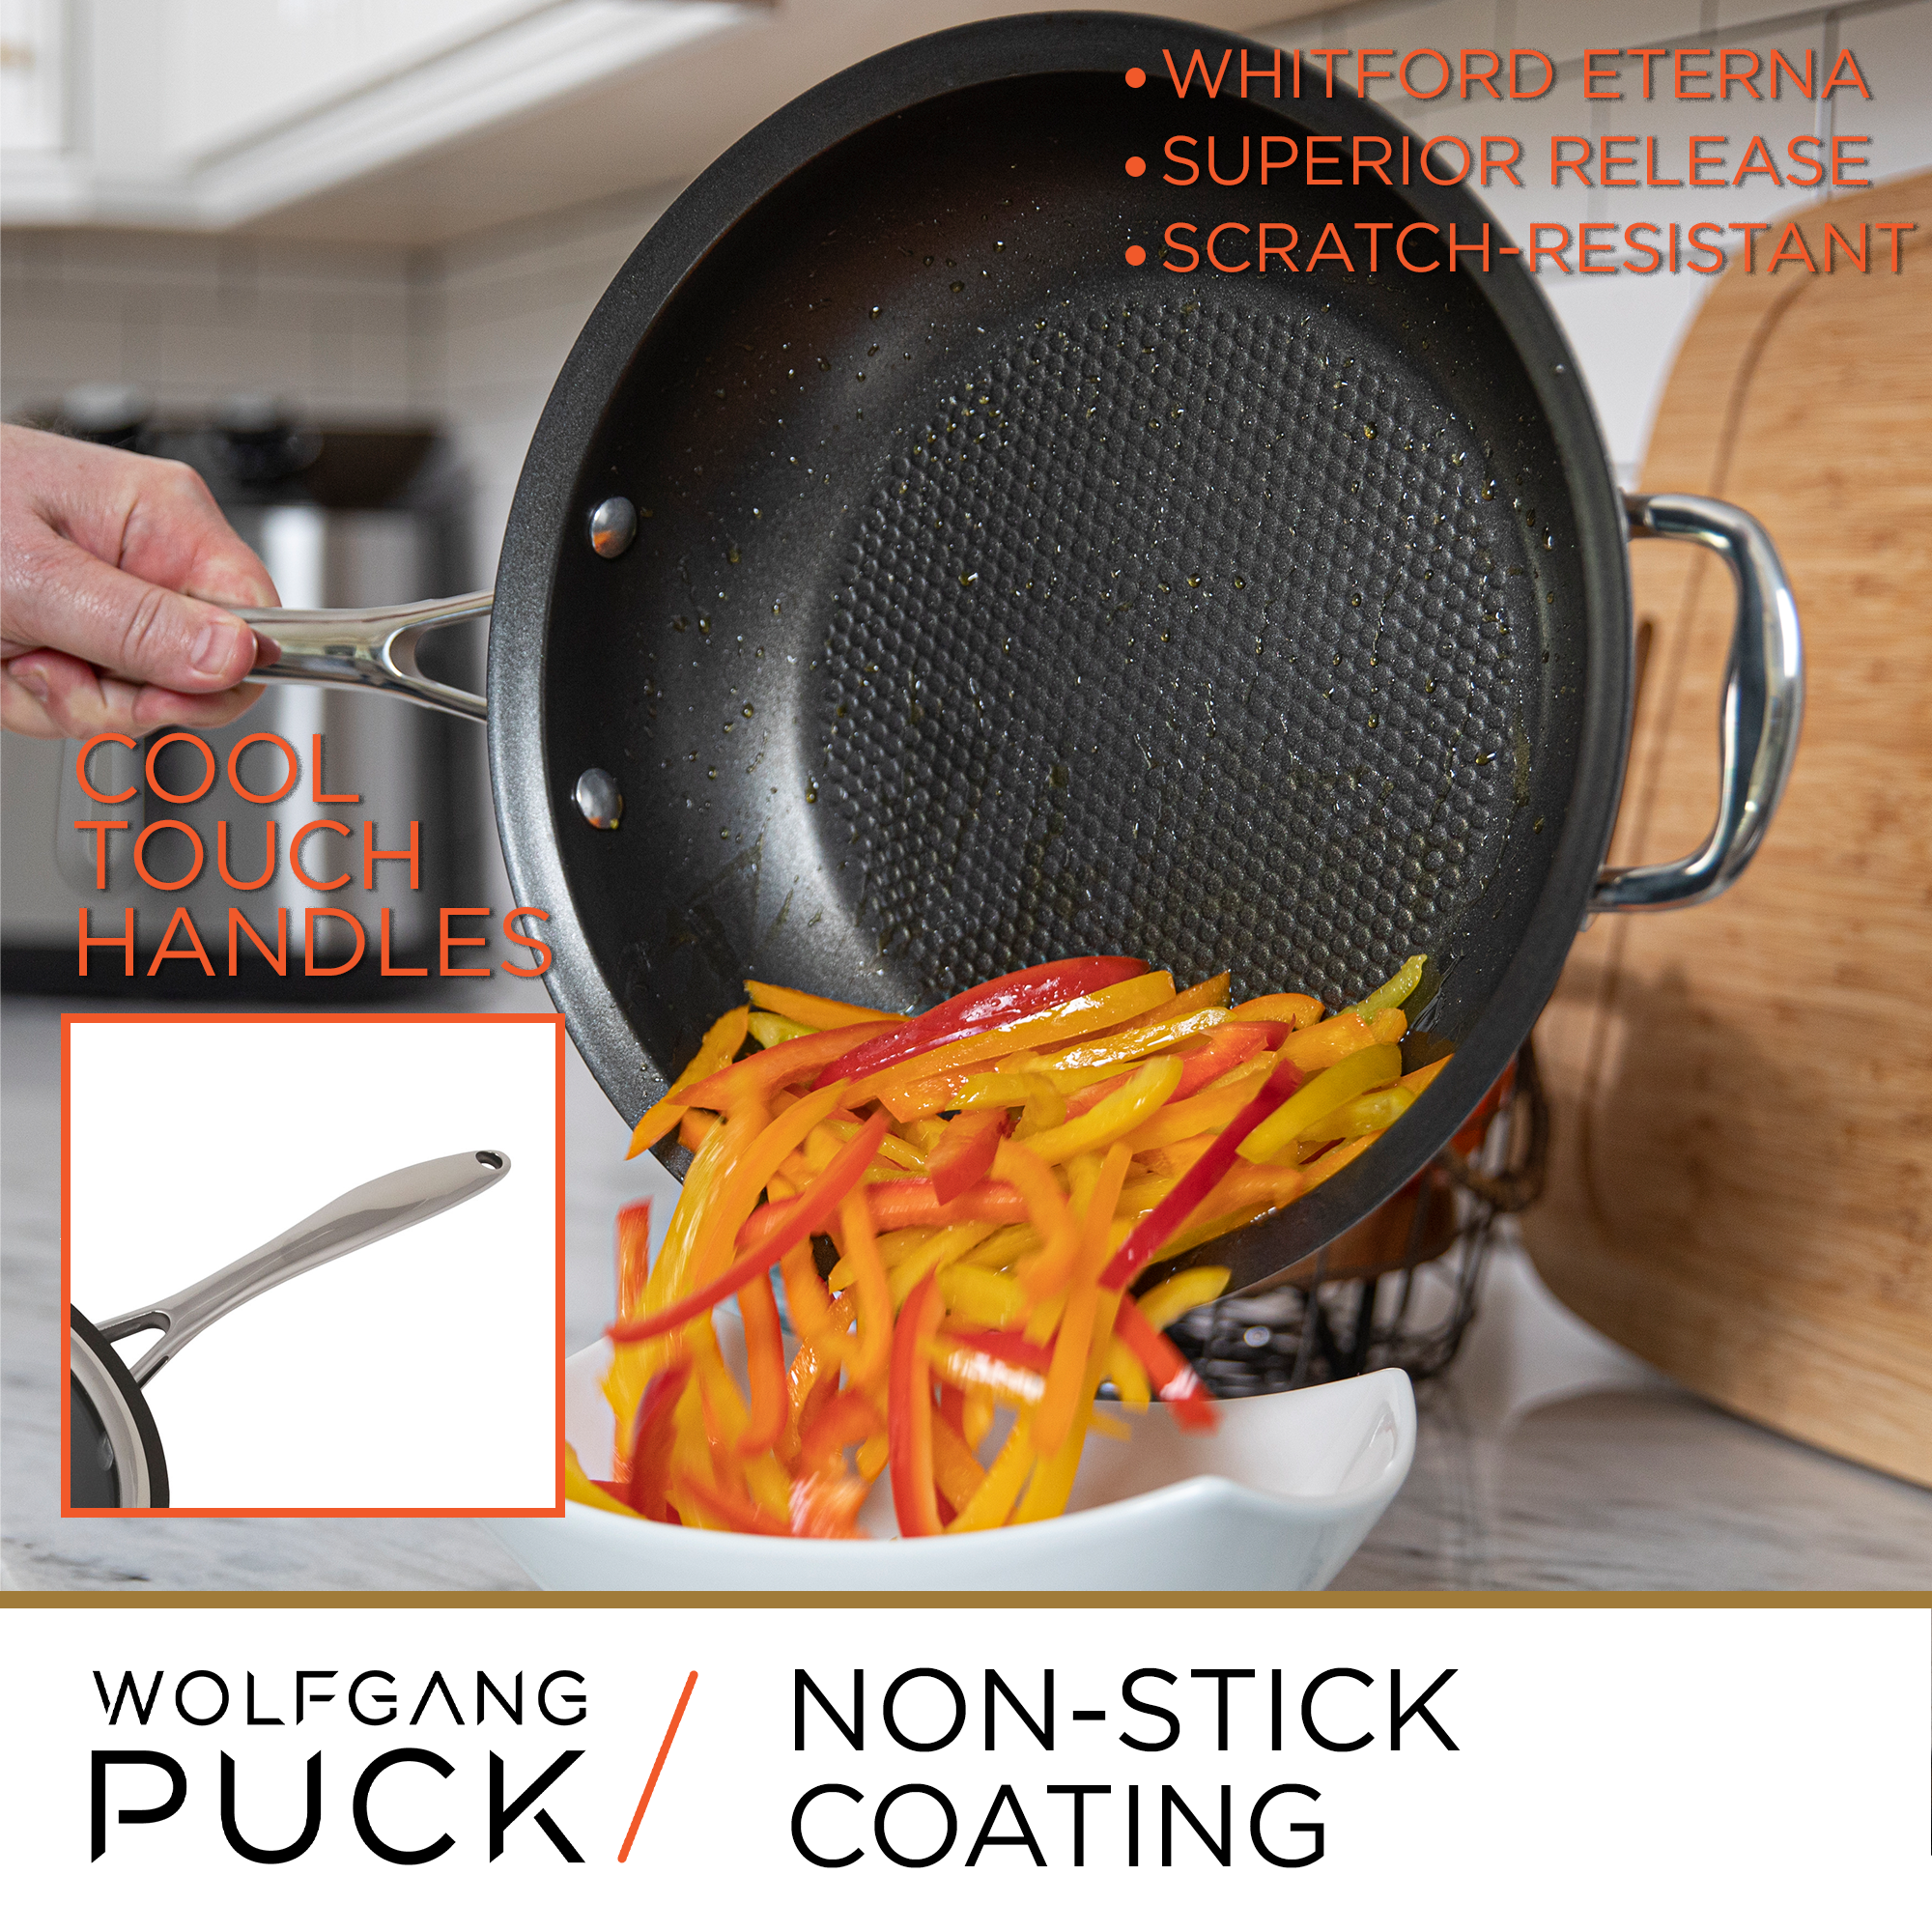 Wolfgang Puck Bistro Elite 27-piece Stainless Steel Cookware Set